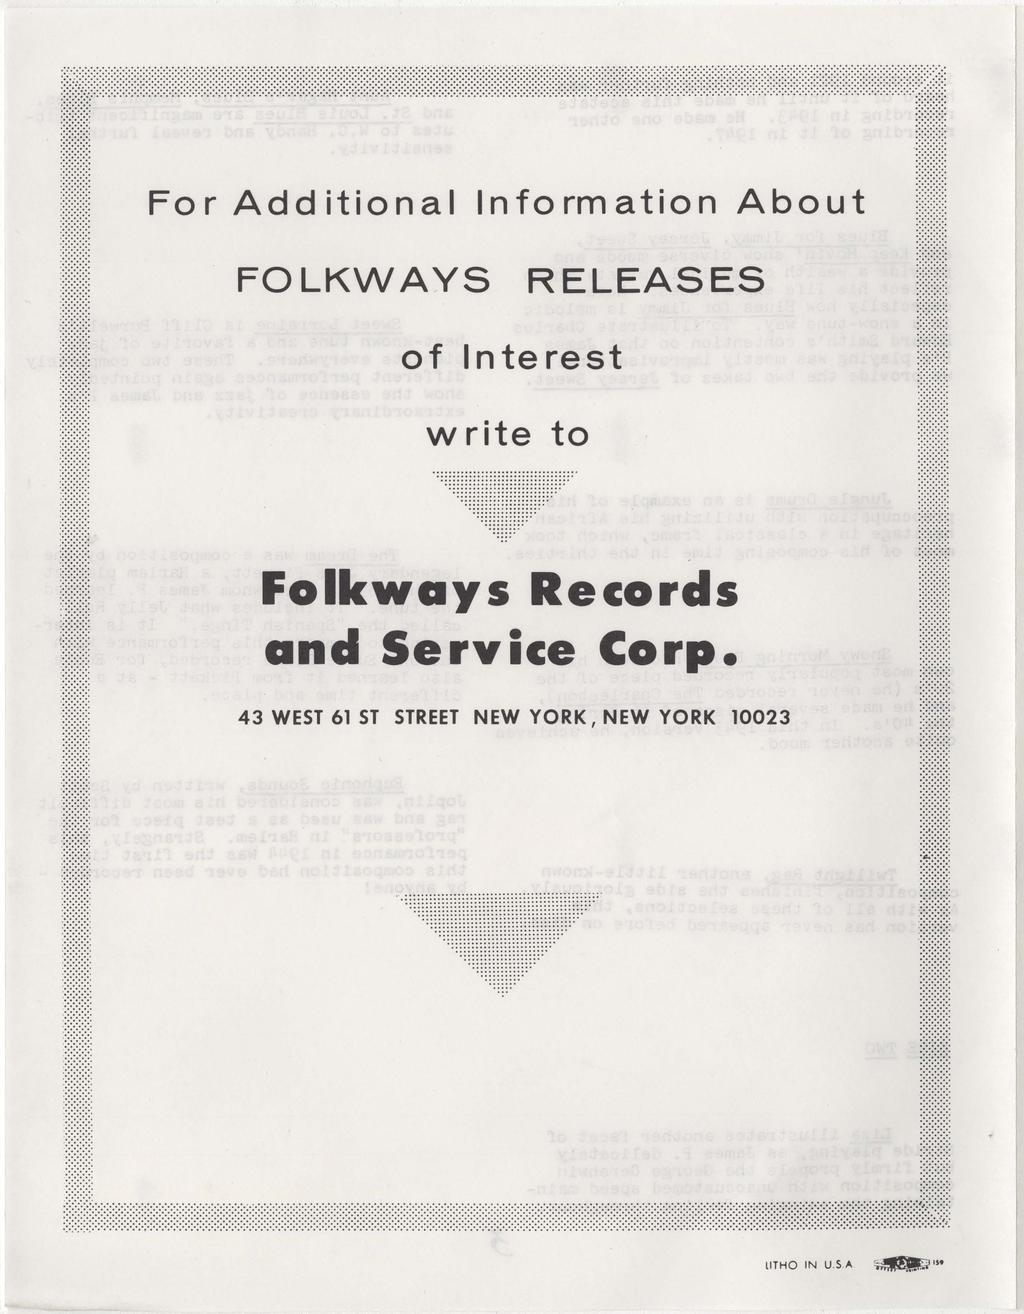 :.;.;.;.;.; For Add it ion a I I n form a t ion Abo u t ::::::.;::: FOLKWAYS RELEASES of Interest w rite to..........::::::::::::::::::... :::::::::'...................... FolkYlays Records and Service Corp.